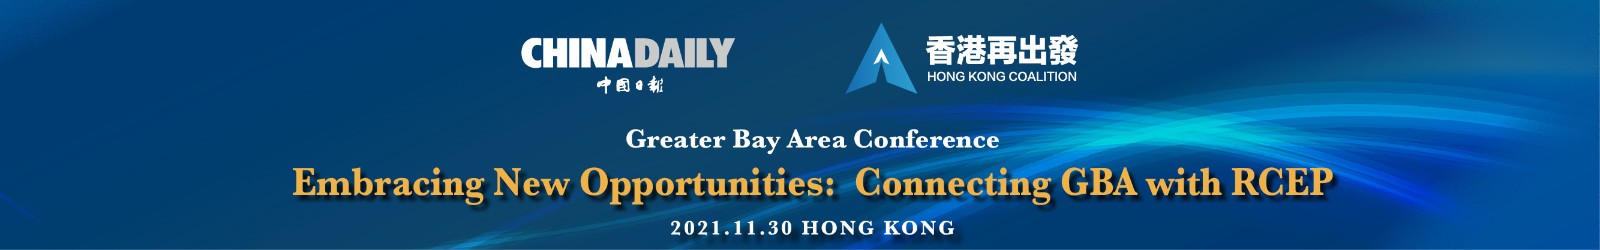 Greater Bay Area Conference - Embracing New Opportunities: Connecting GBA with RCEP